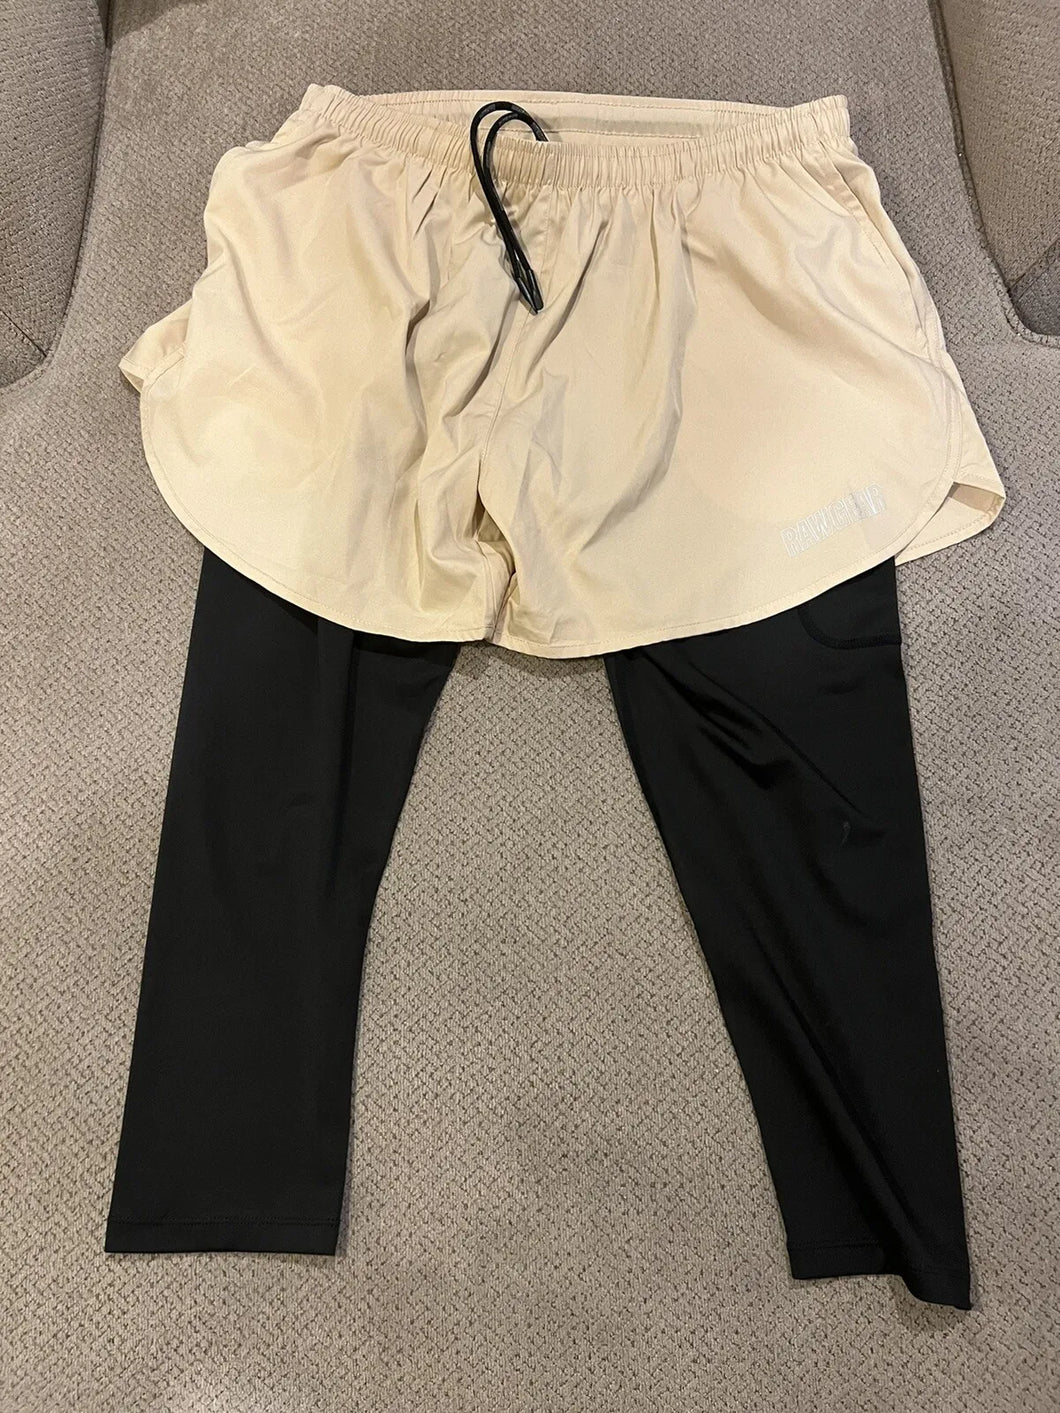 RAW GEAR 2 In 1 Compression Leggings Running Tan Running Shorts Size Large